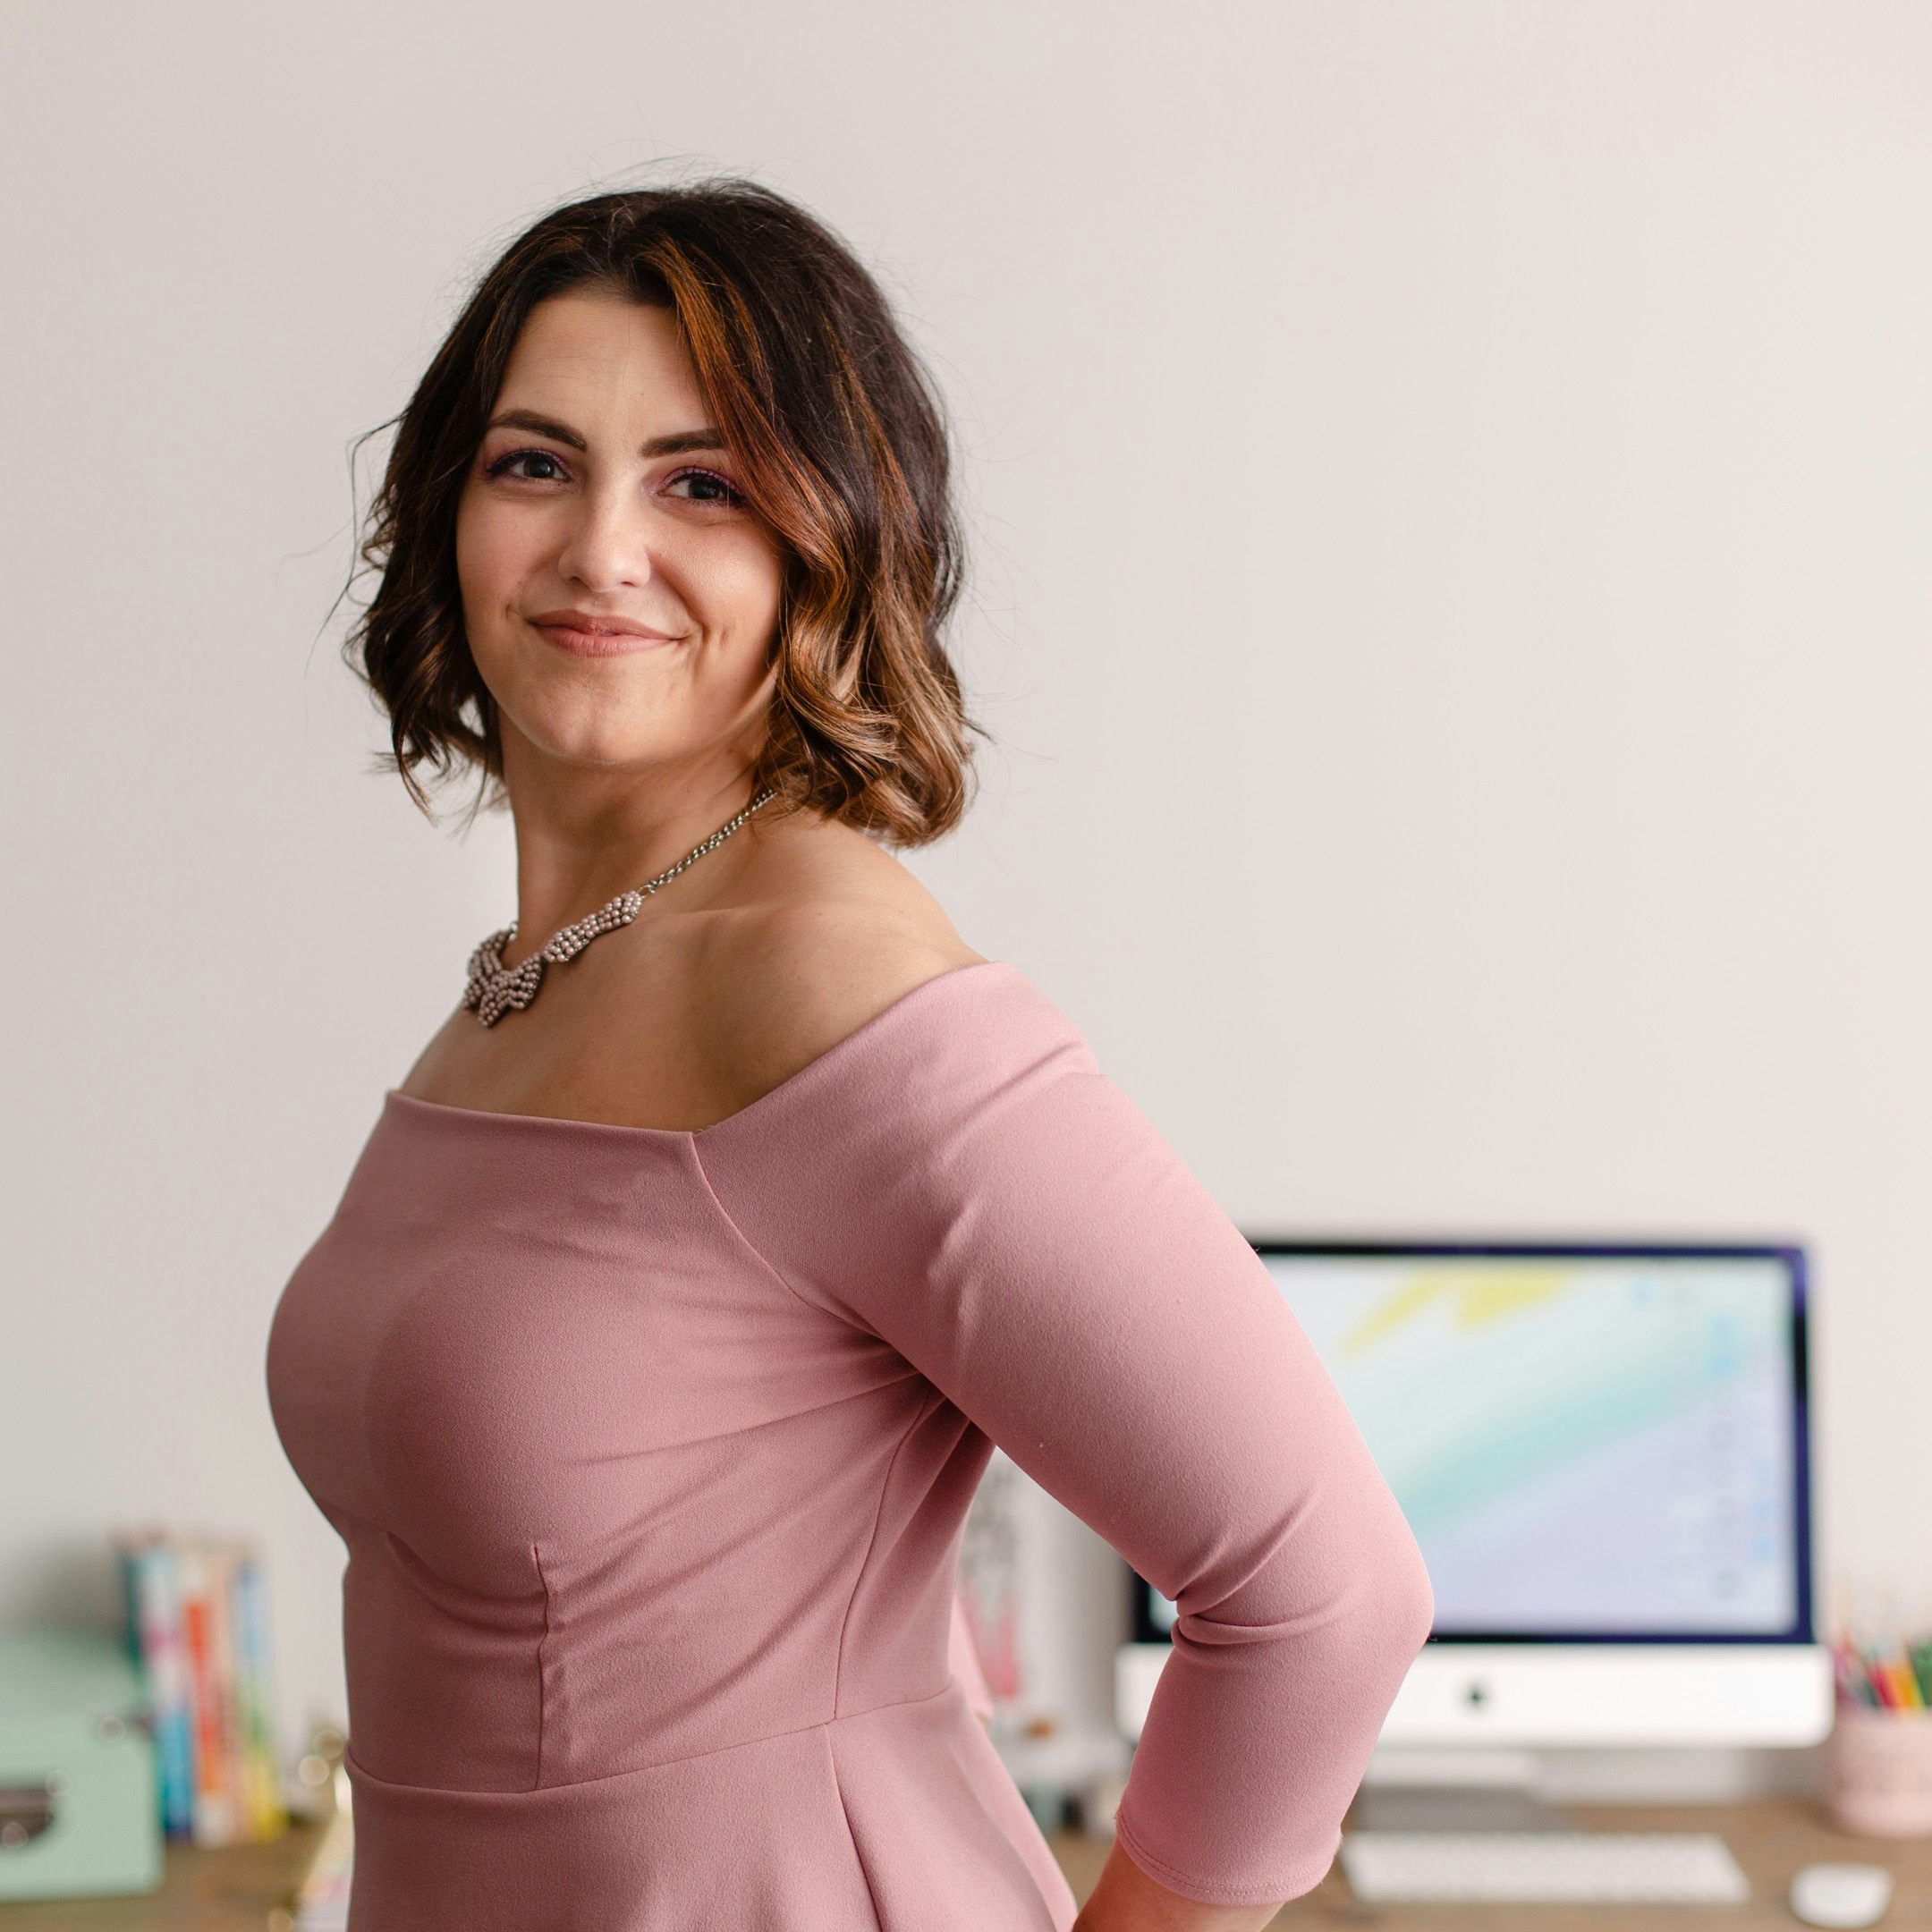 Softly smiling white woman with medium-length dark brown curly hair in a pink blouse, standing in front of a desk with an iMac